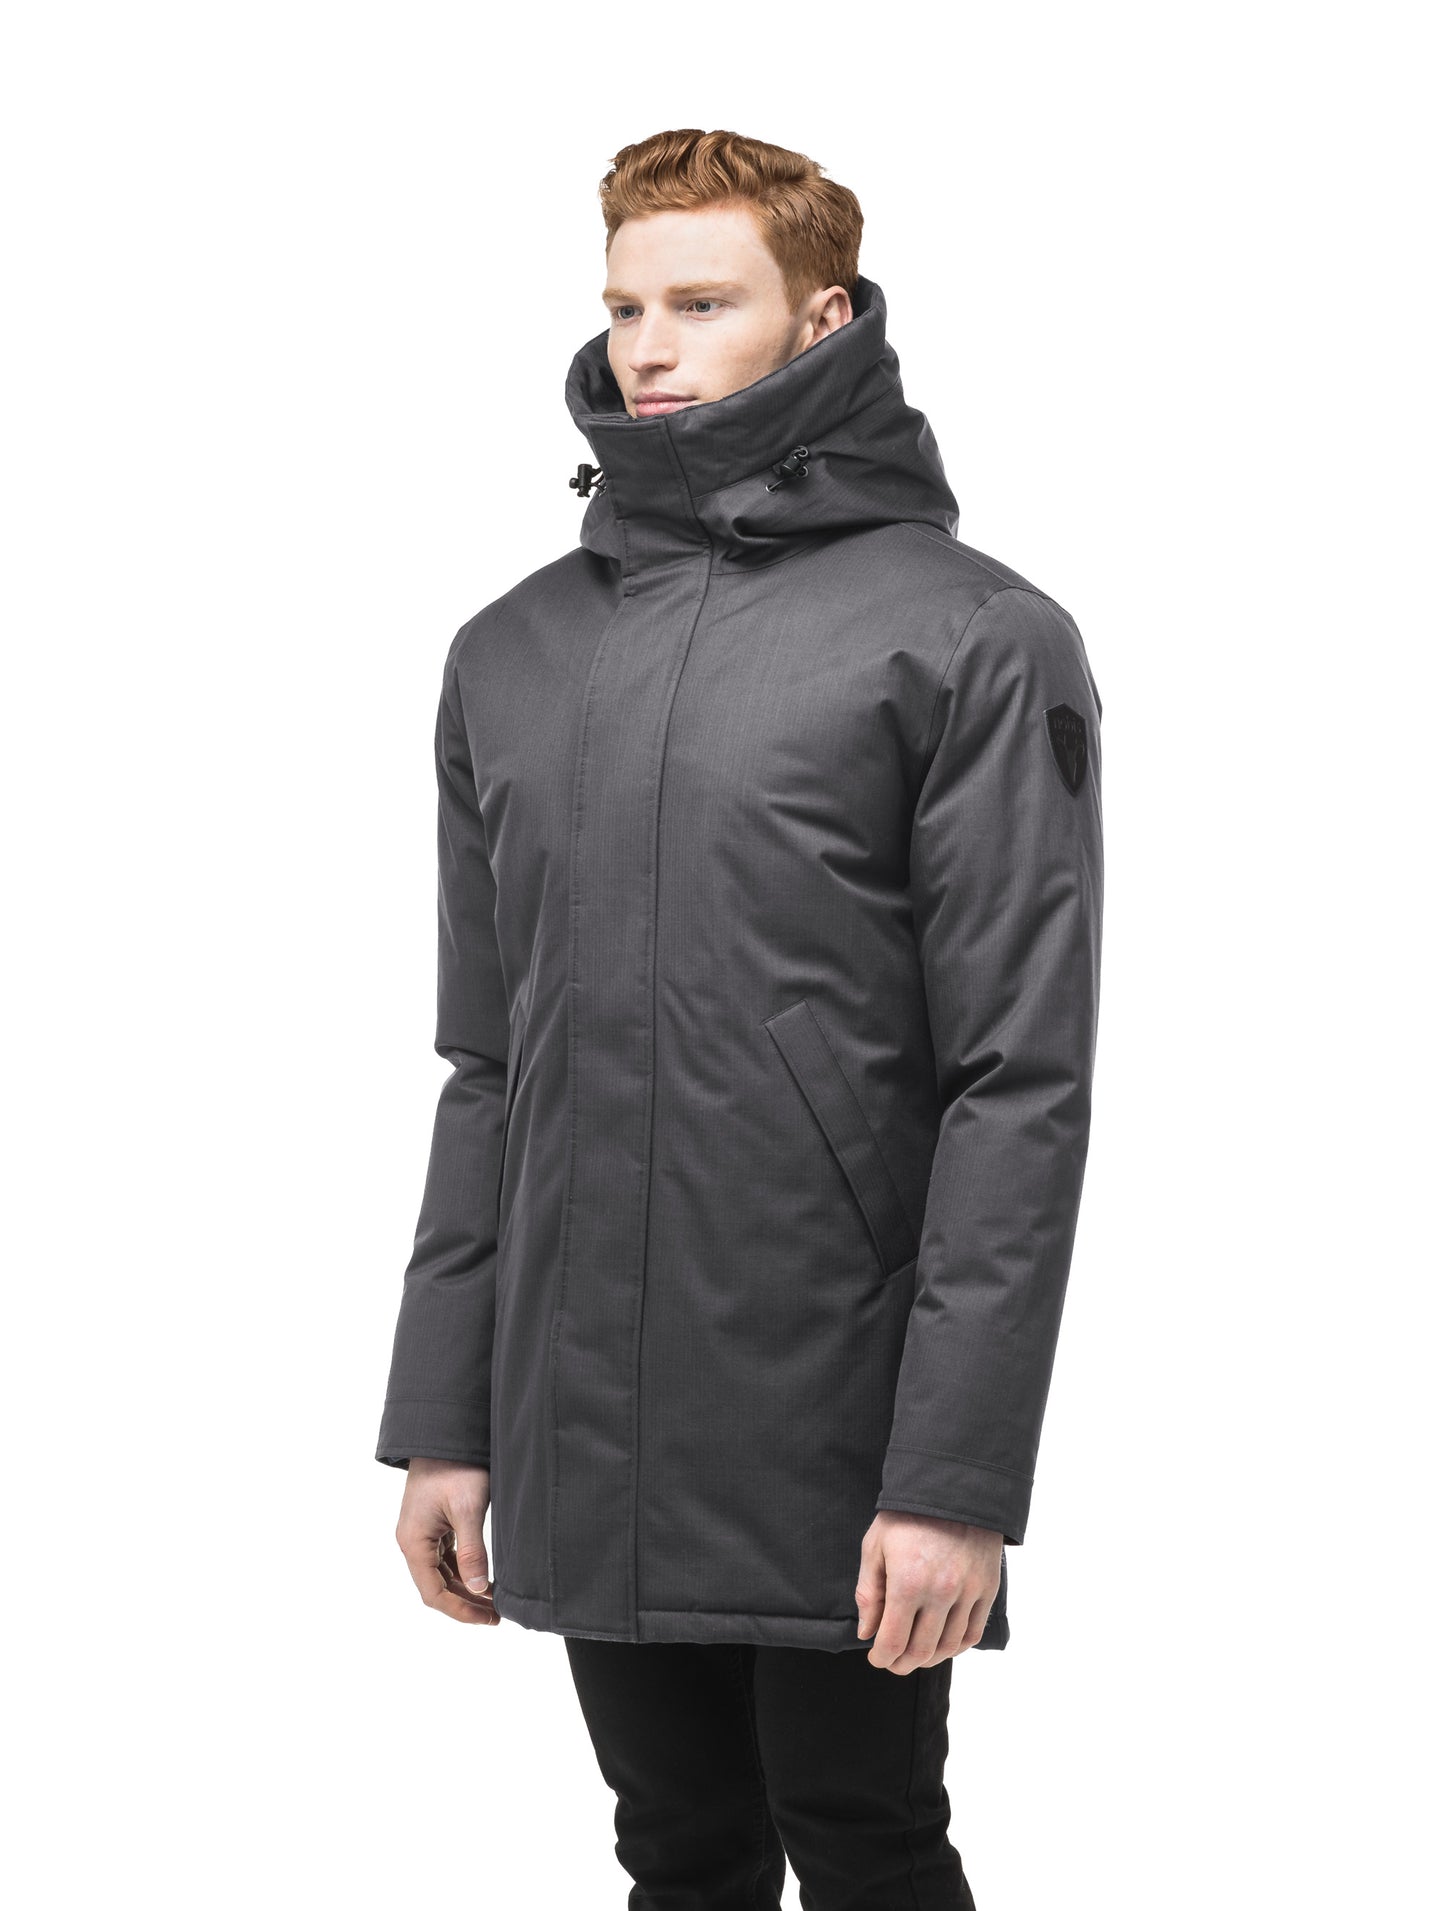 Pierre Men's Jacket in thigh length, Canadian white duck down insulation, non-removable down-filled hood, angled waist pockets, centre-front zipper with wind flap, and elastic ribbed cuffs, in CH Steel Grey